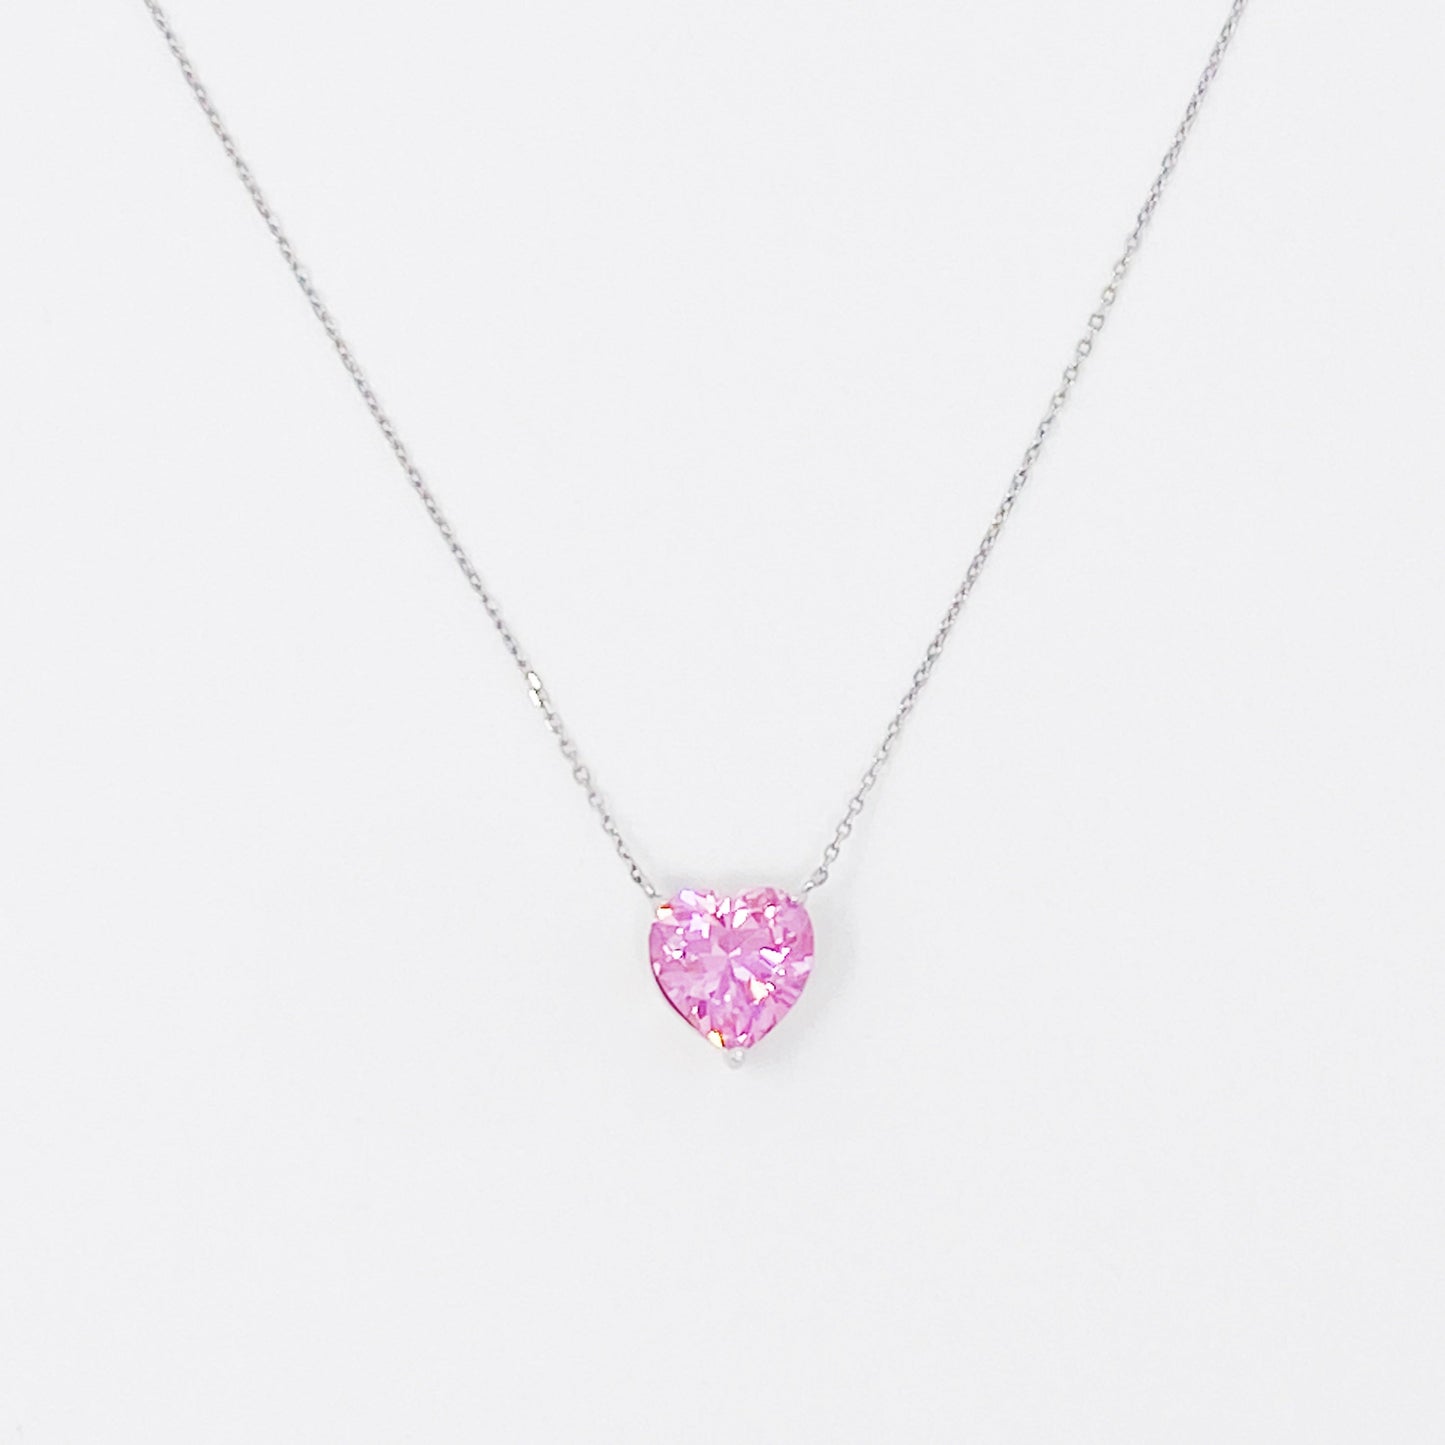 Absolute Beauty Sterling Silver Heart Necklace